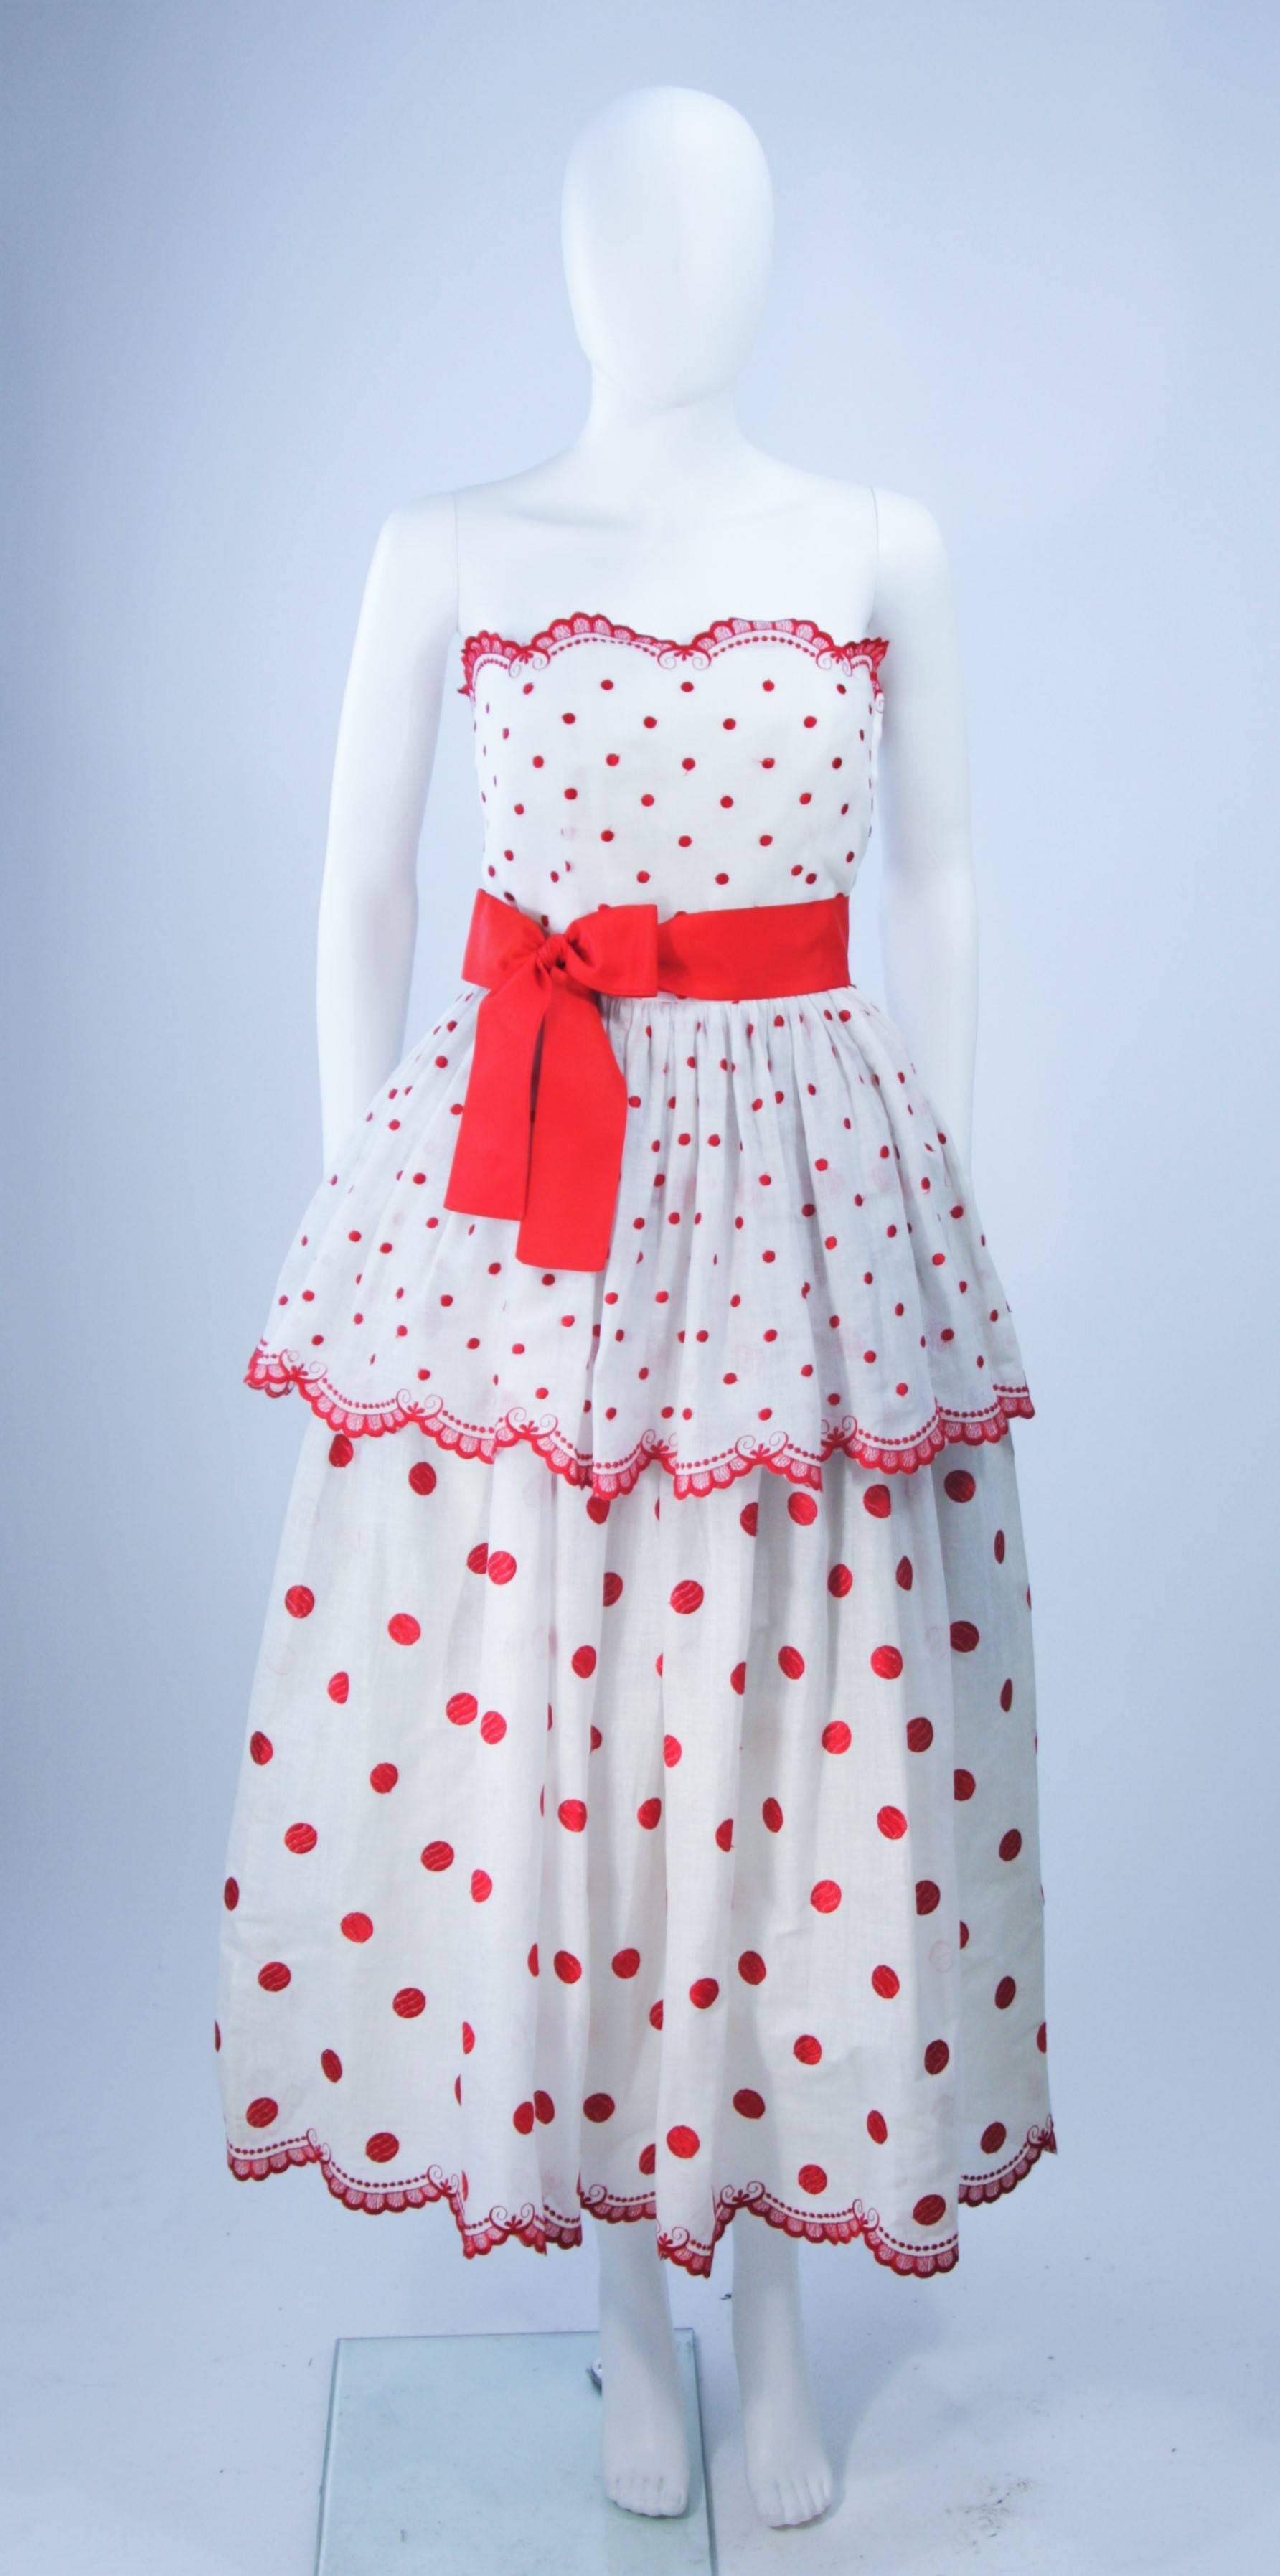  This Alberto Capraro dress is composed of a white fabric embroidered with red. The tiered design features scalloped edging. There is a zipper closure and ribbon belt. In excellent vintage condition. 

**Please cross-reference measurements for